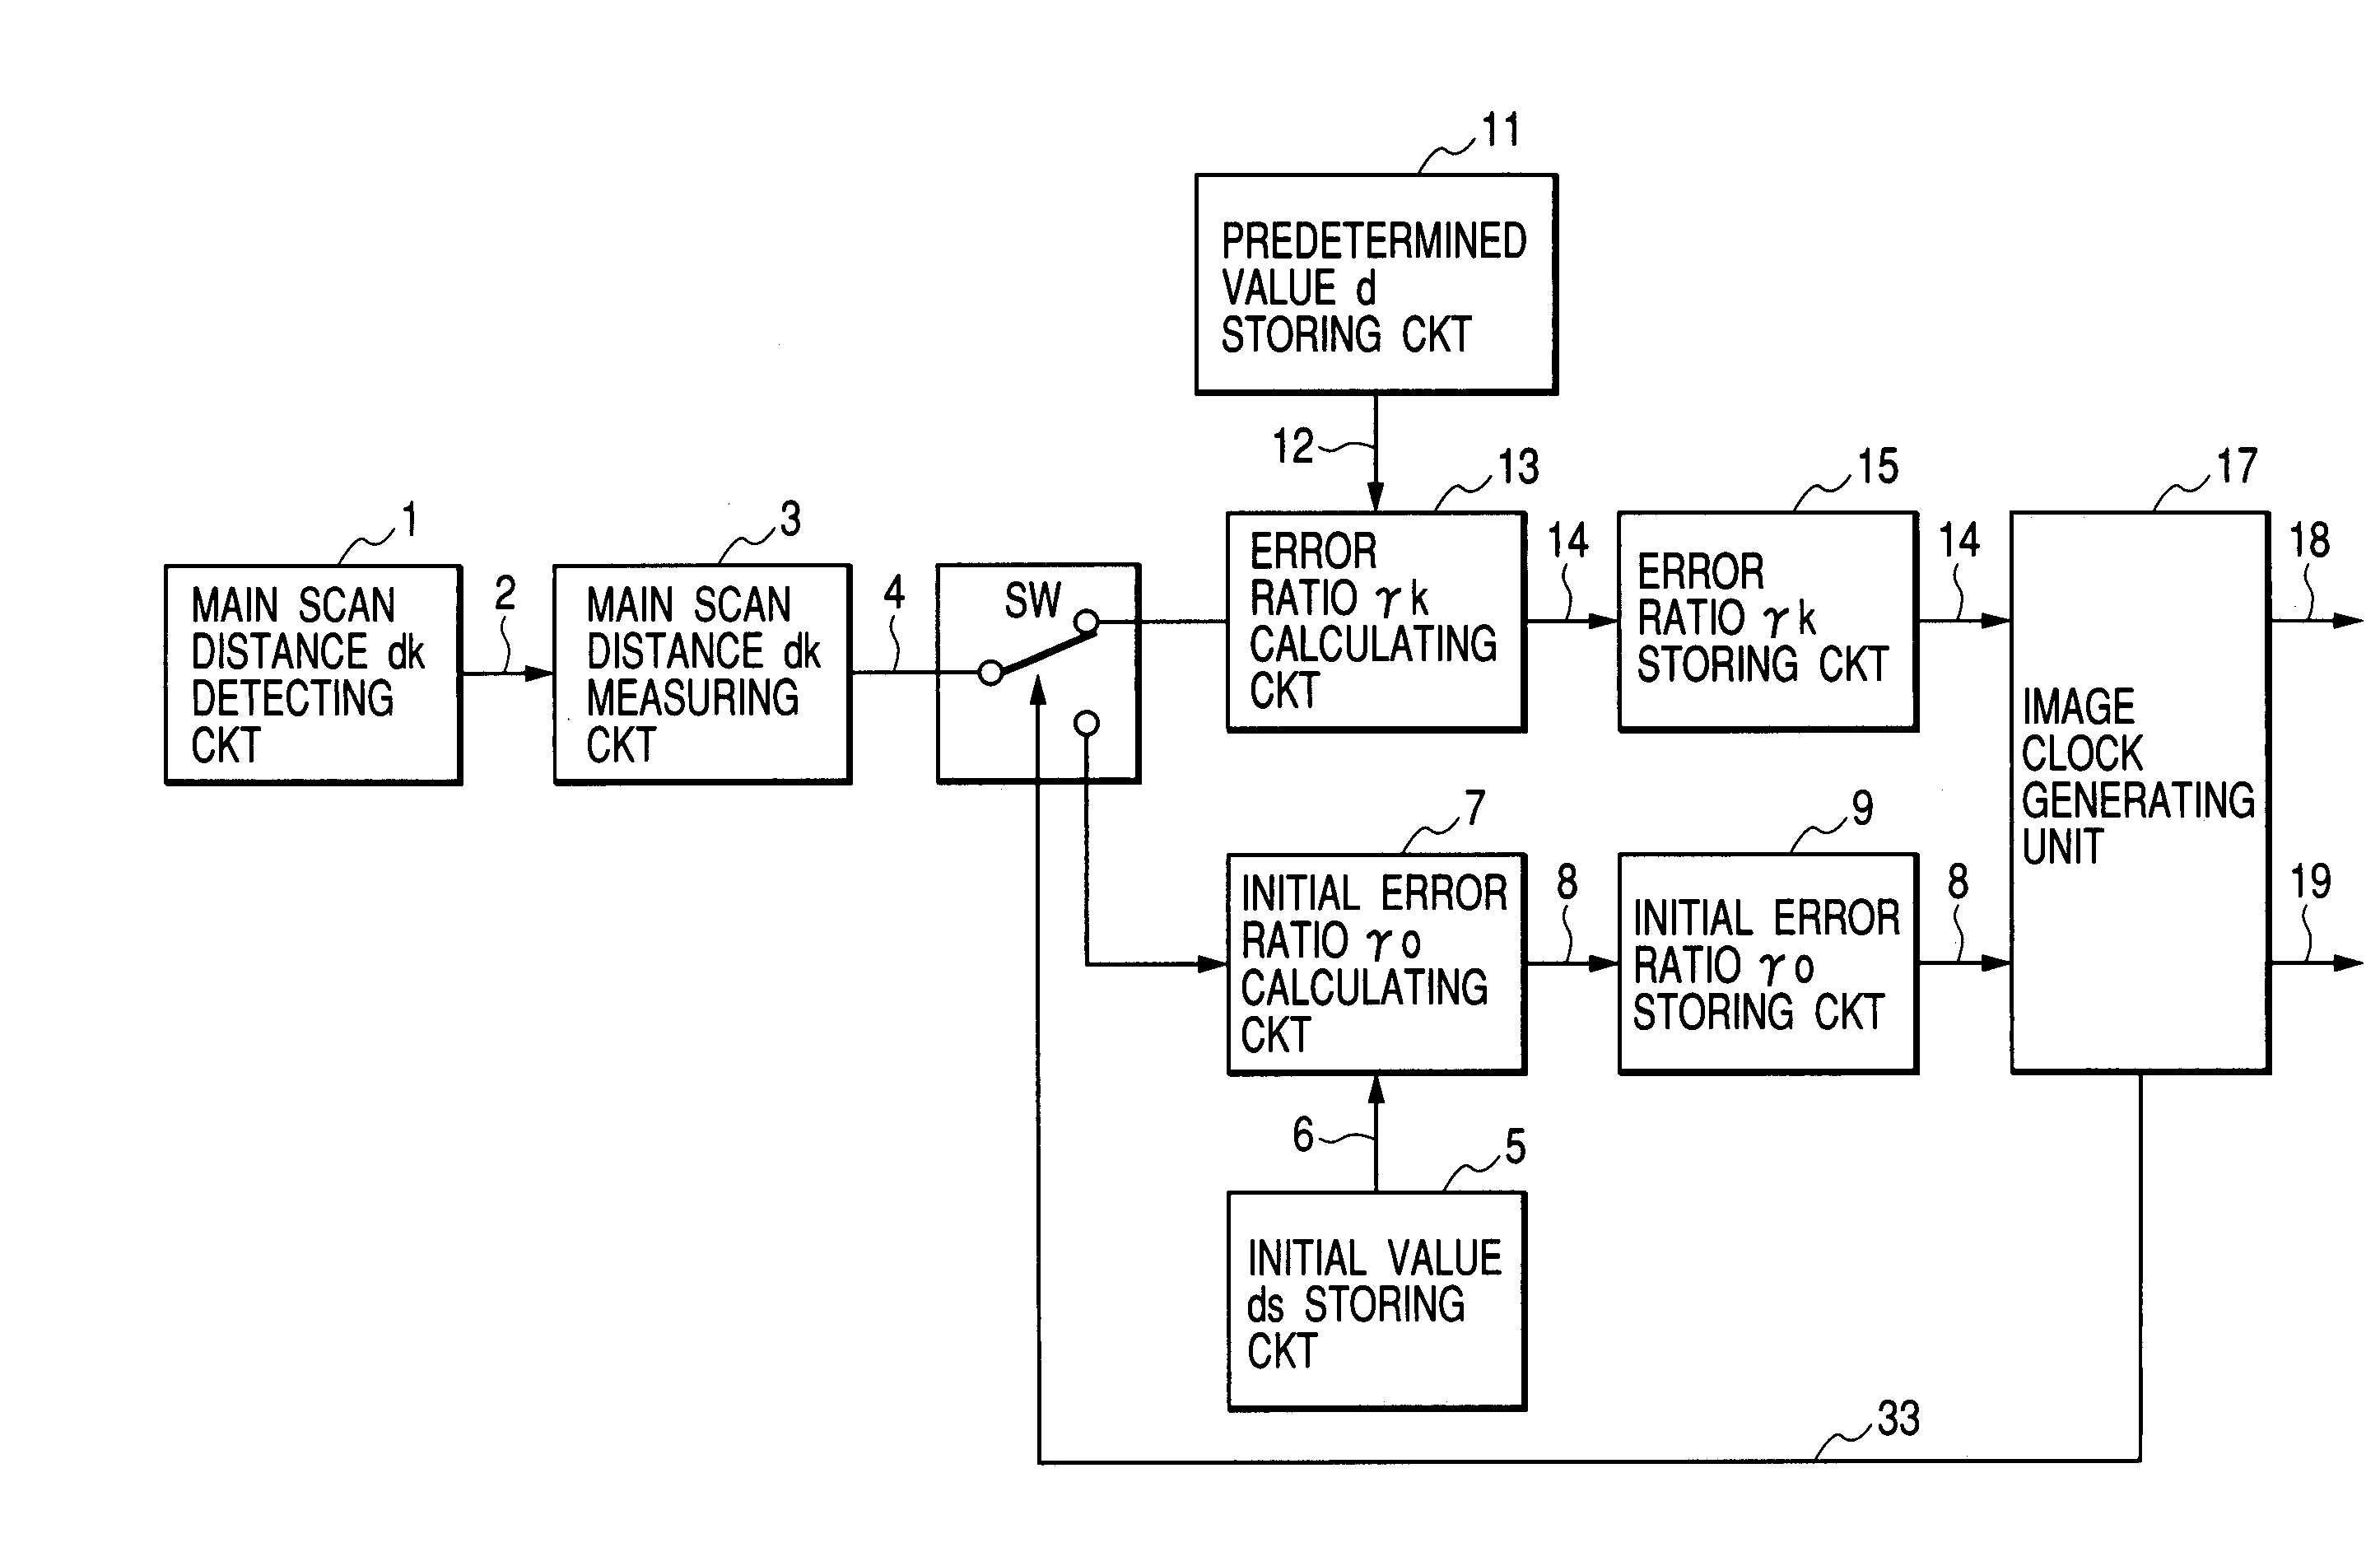 Frequency modulation apparatus and frequency modulation method